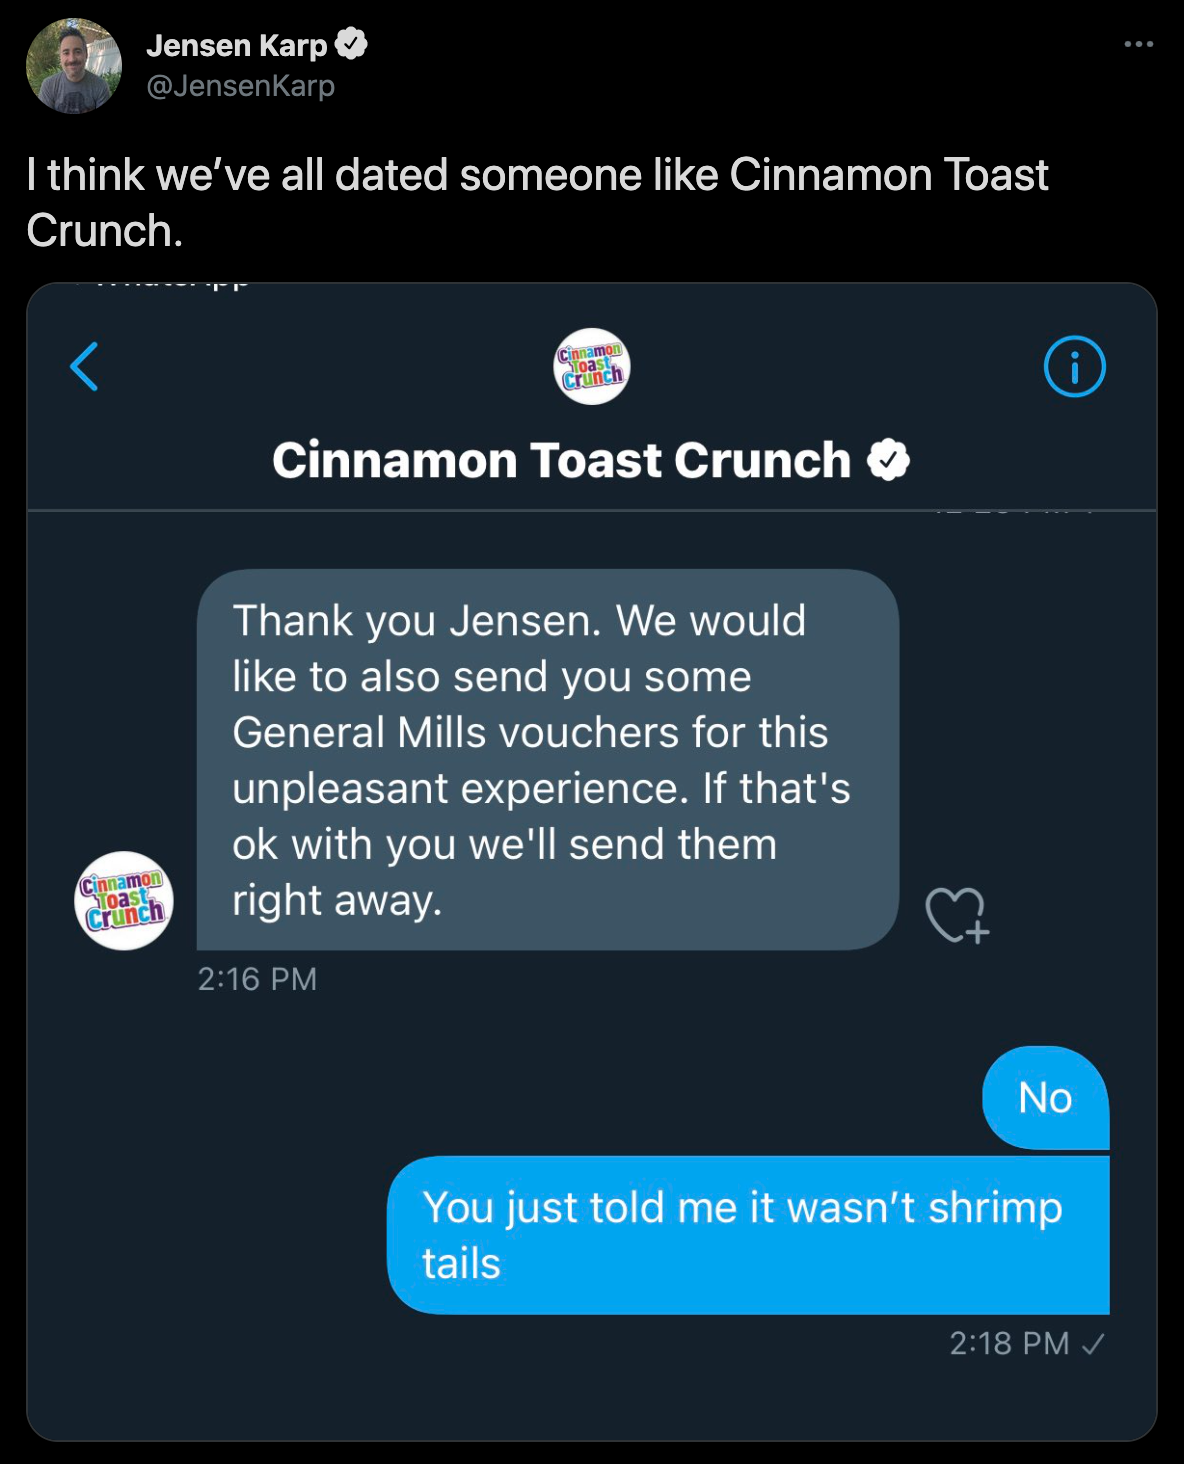 cinnamon toast crunch shrimp tails - Jensen Karp I think we've all dated someone Cinnamon Toast Crunch. Cinnamon Toast Crunch Thank you Jensen. We would to also send you some General Mills vouchers for this unpleasant experience. If that's ok with you we'